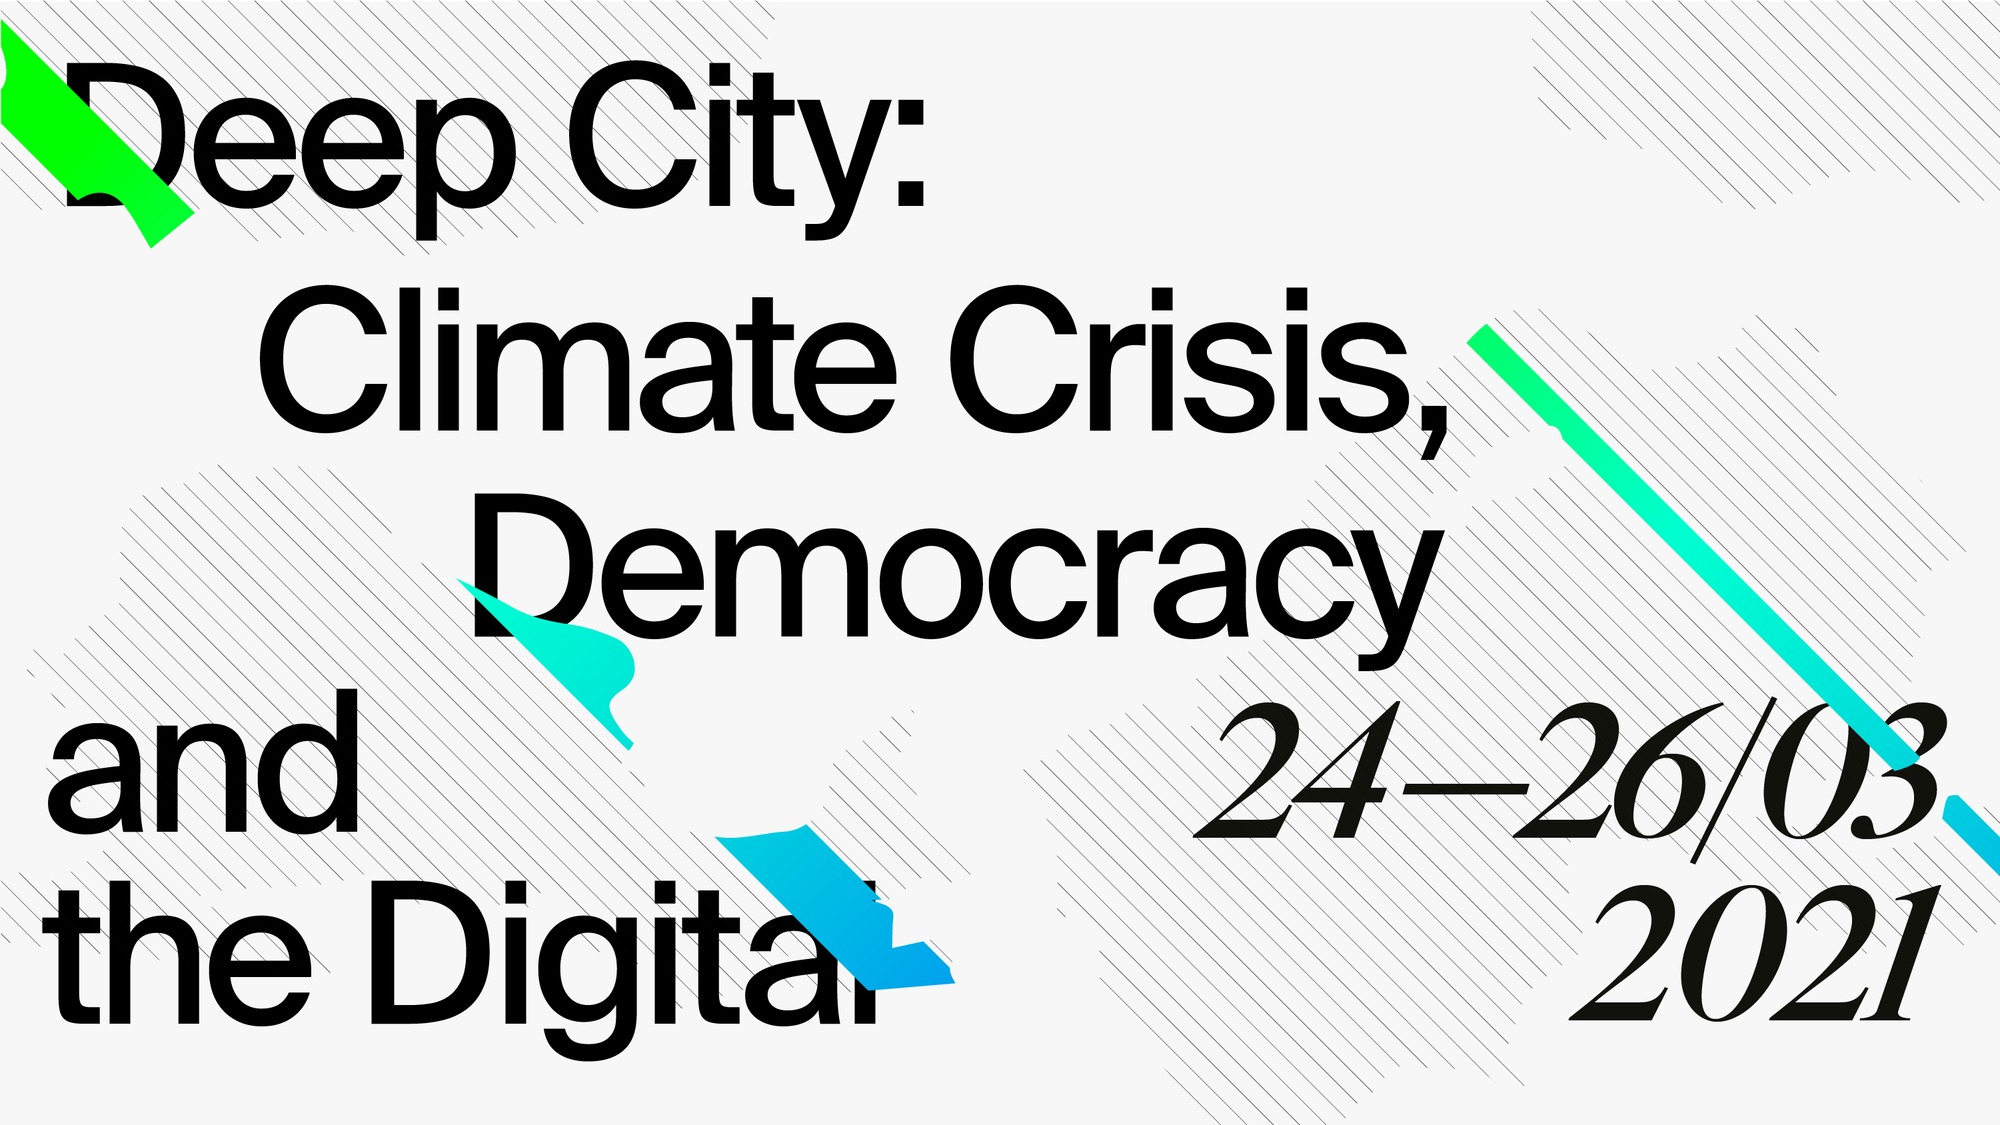 Synne Tollerud Bull will present Time to Reflect Reality by Bull.Miletic at the international conference Deep City: Climate Crisis, Democracy and the Digital.